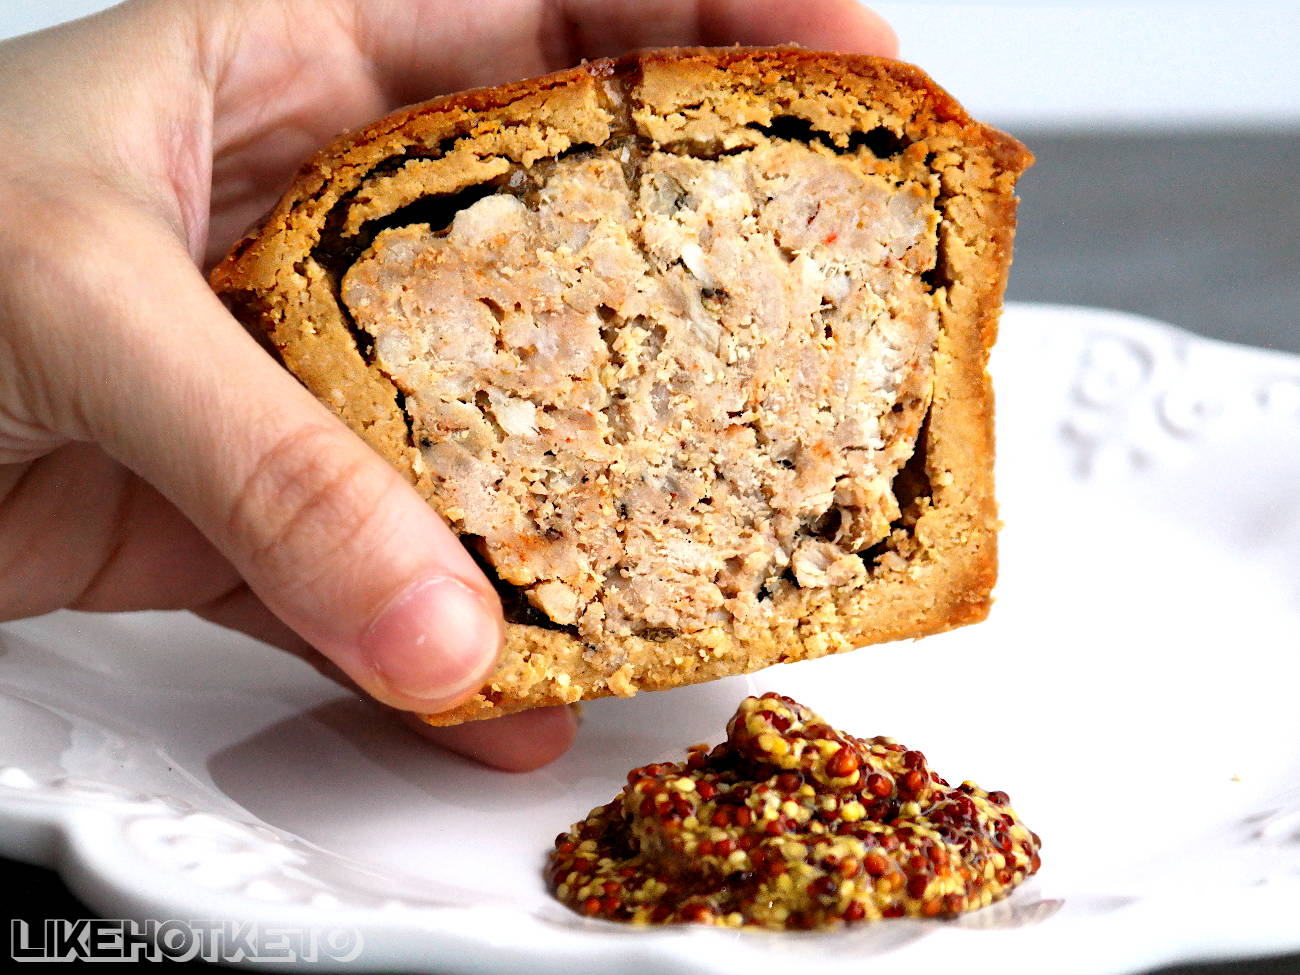 Gluten-free pork pie cut in half, showing the pork and jellied stock filling.